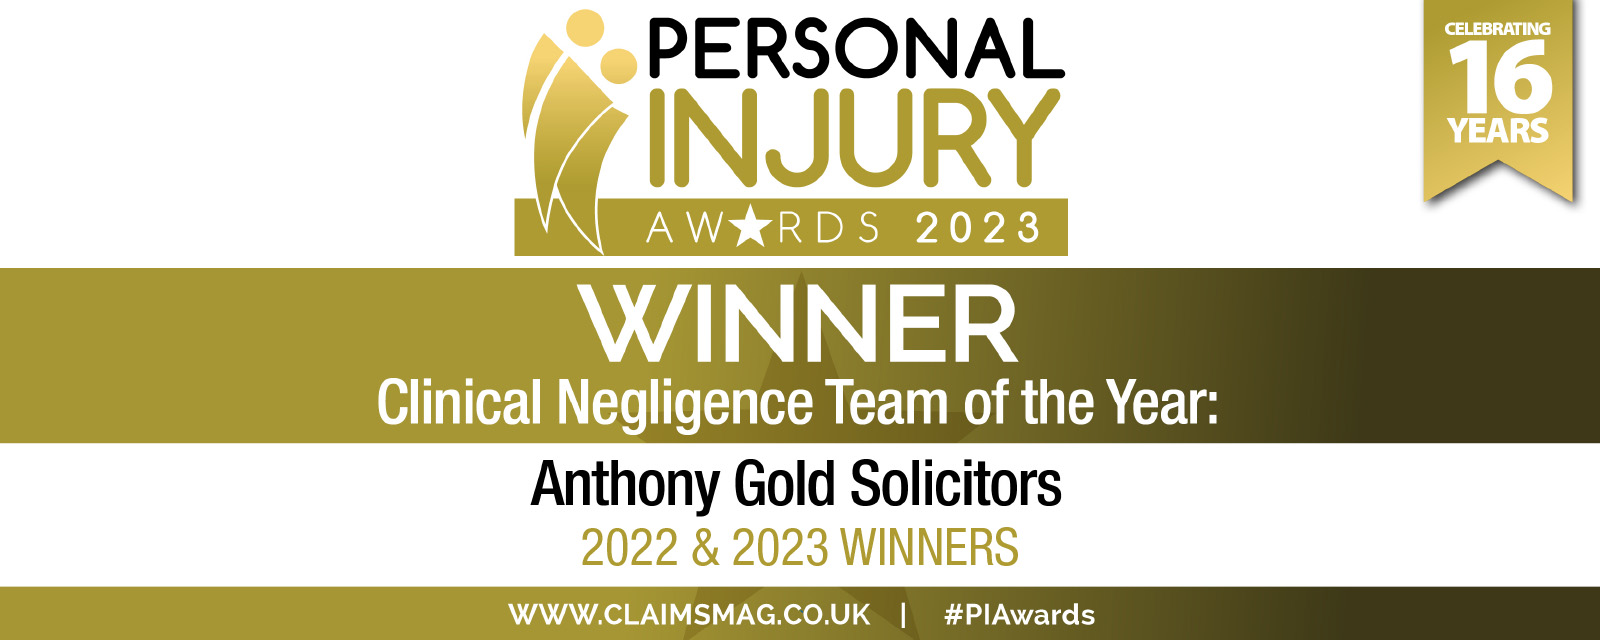 Proud winners of “Clinical Negligence Team of the Year” Award